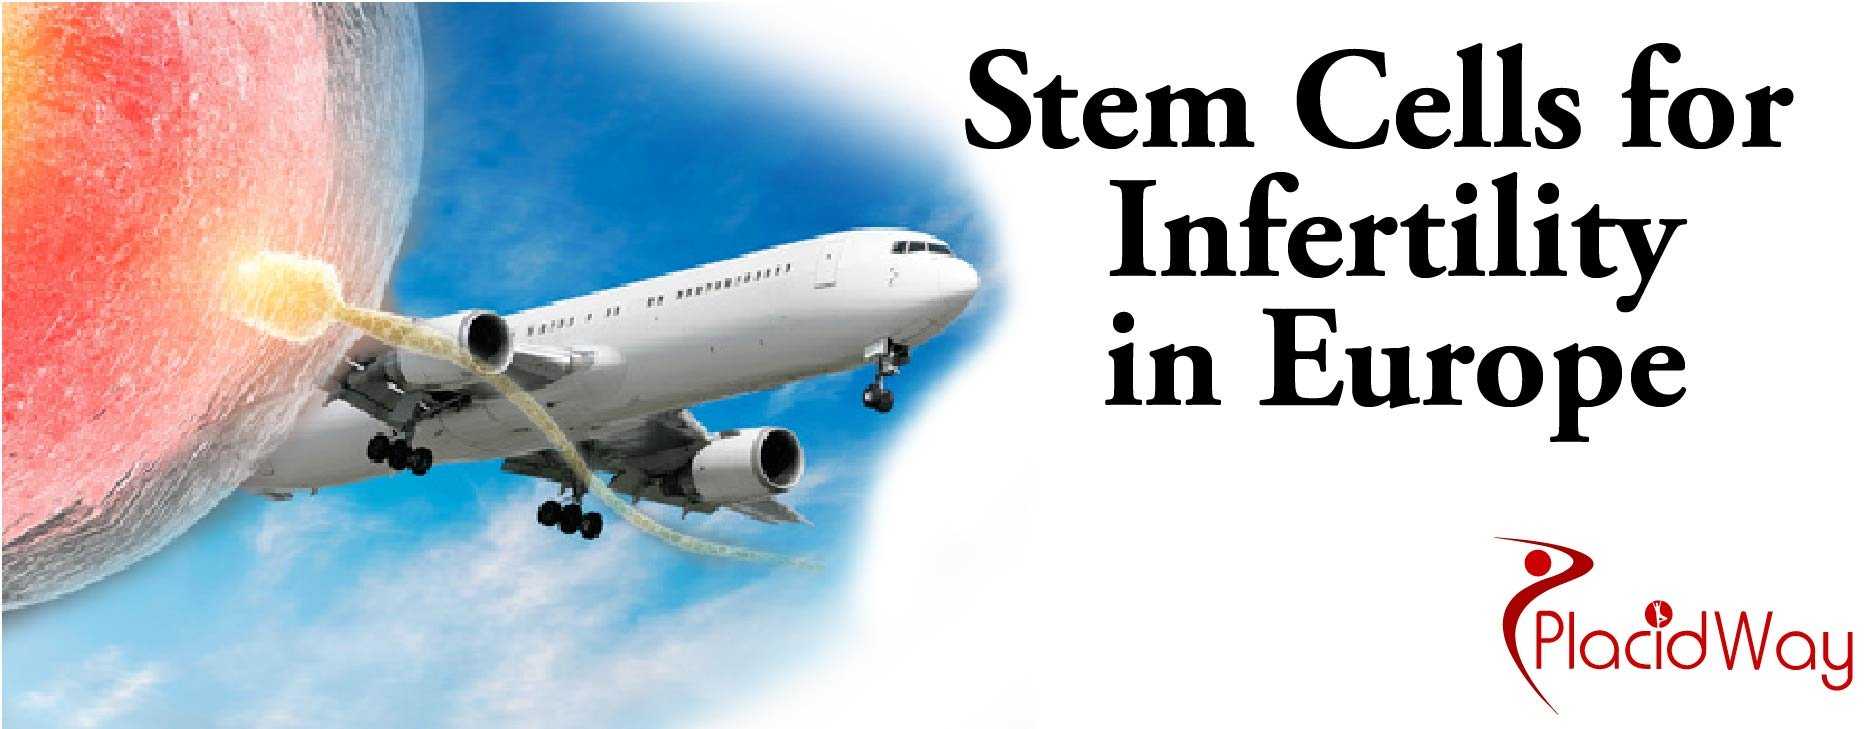 Infertility Treatment in Europe, Stem Cell Therapy for Infertility